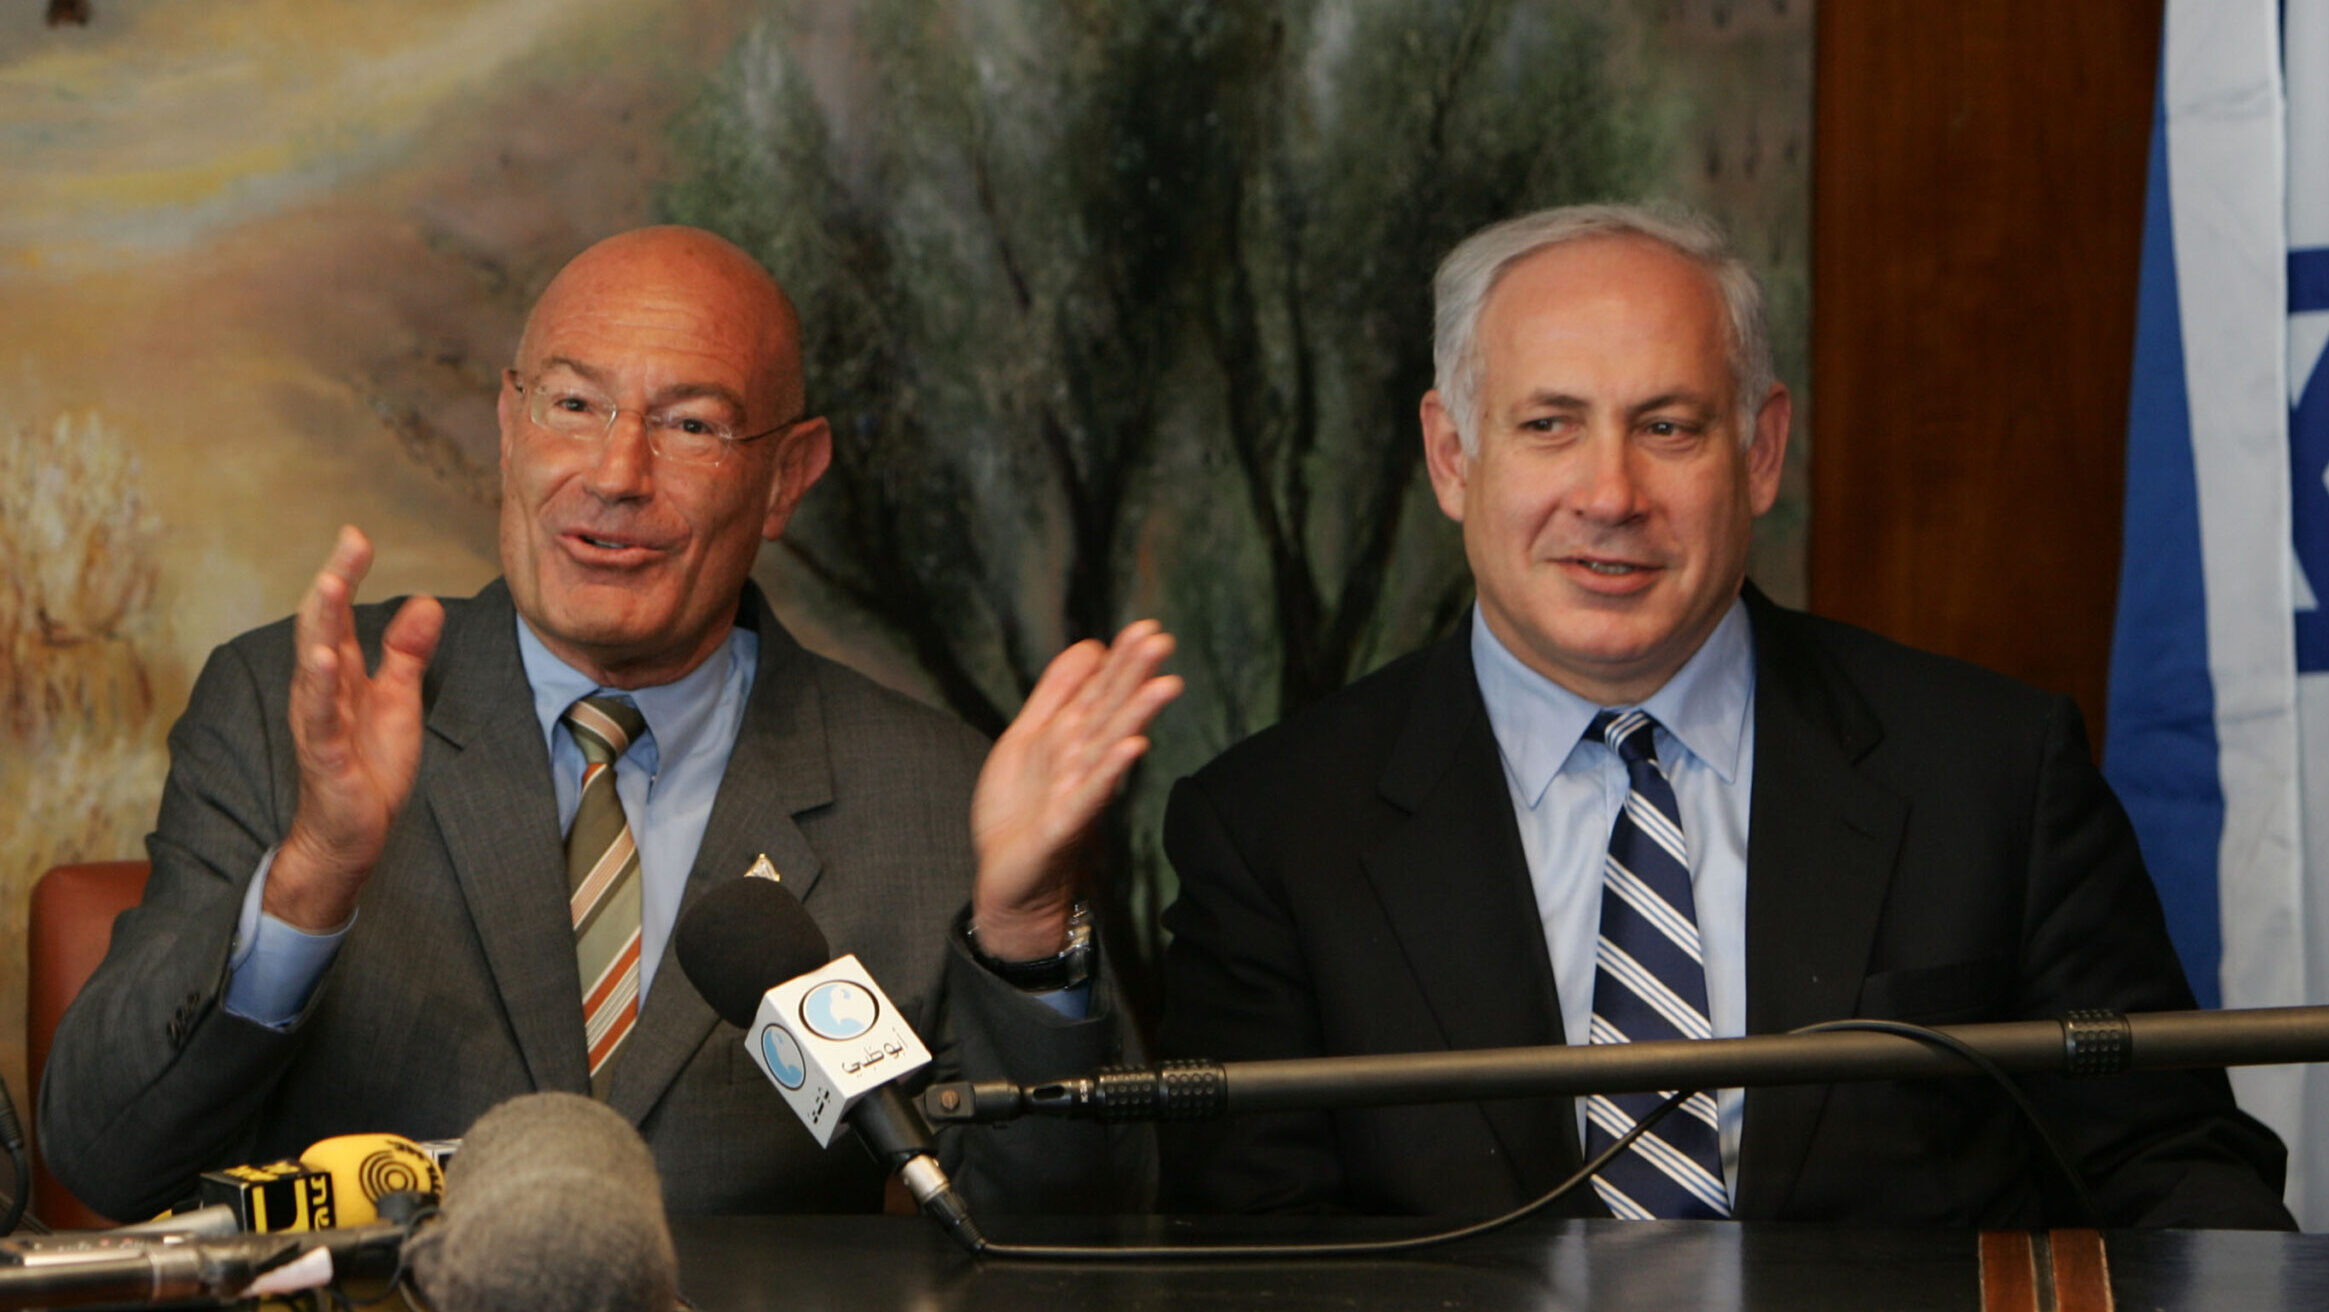 Producer Milchan To Testify in Netanyahu Corruption Case Over Alleged Luxury Gifts